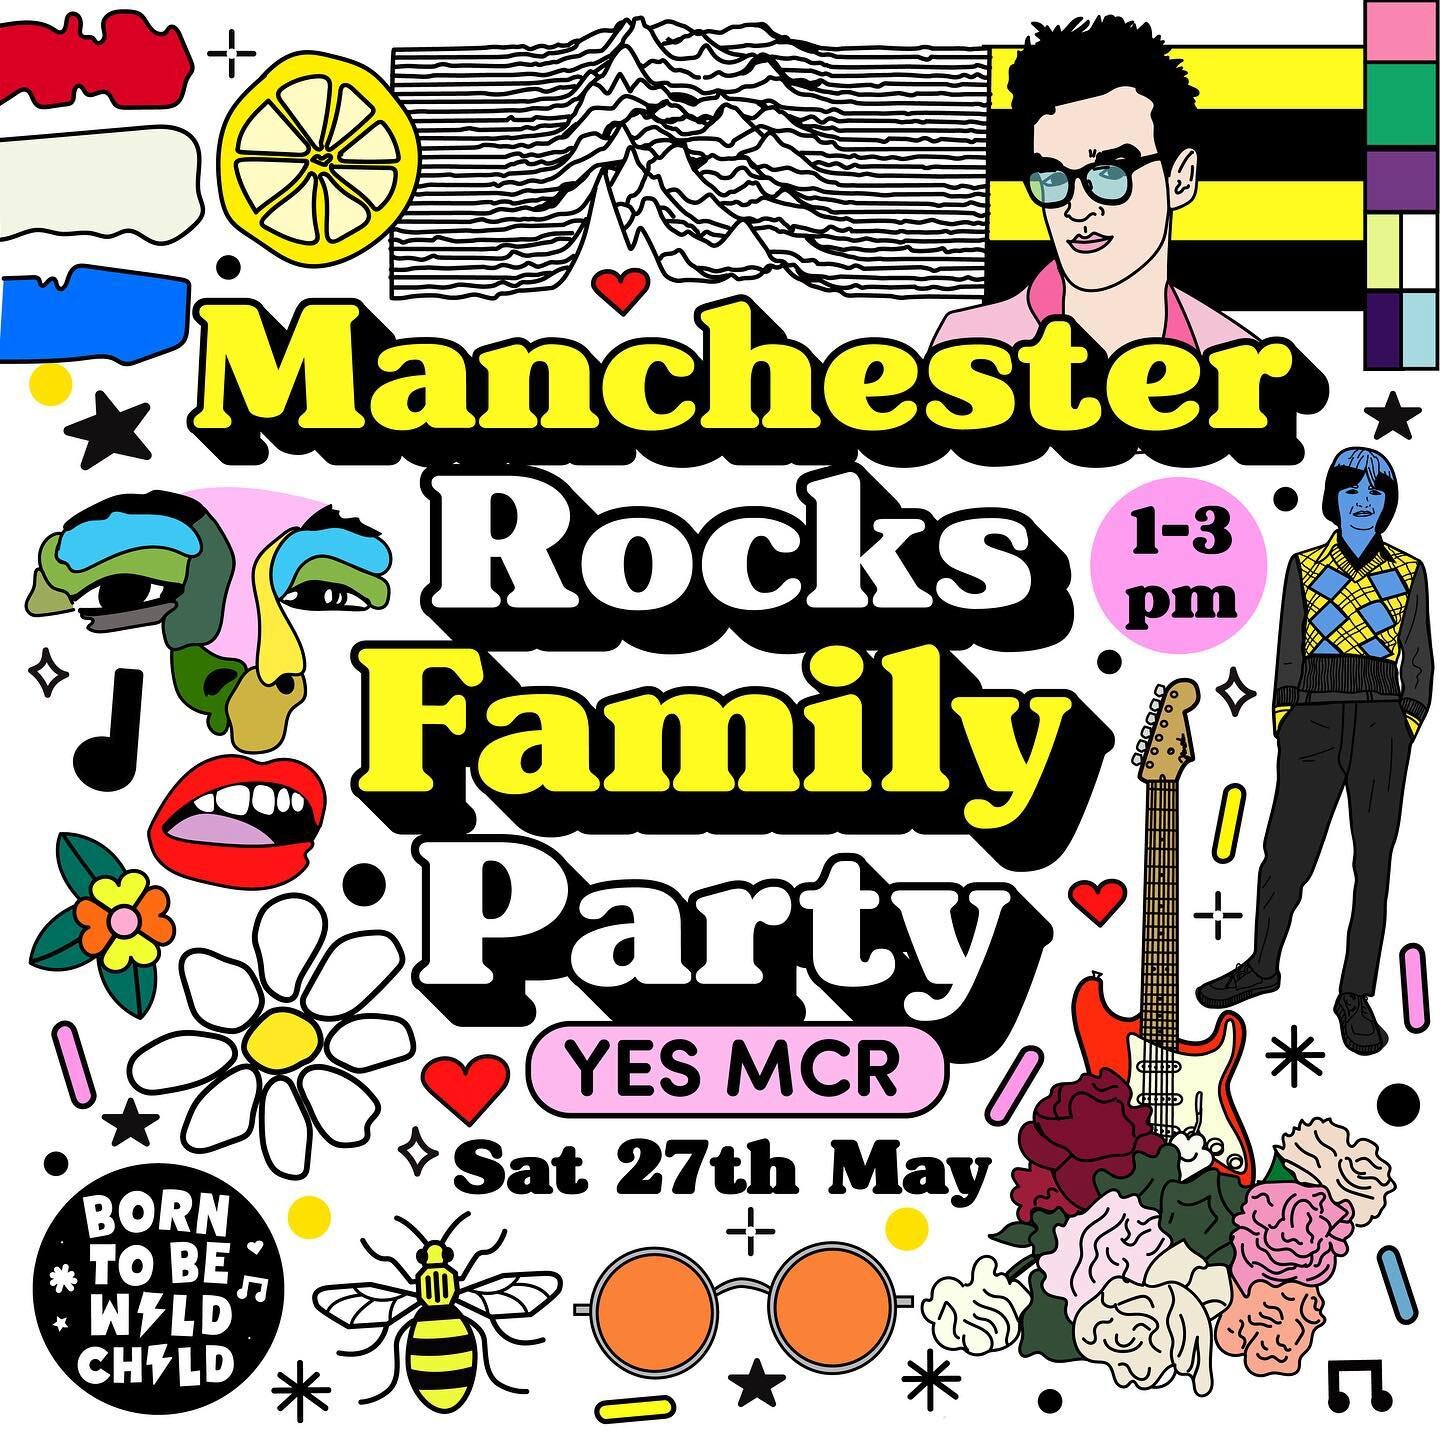 🚧 🐝TICKETS NOW ON SALE @skiddleuk (link in bio) 🚧 🐝

Buzzin to be back @yes_mcr for a Manchester themed family party in the pink room! 💃🕺🪩🚧🐝🎸It&rsquo;s disorder on the dance floor and time to dance dance dance to the radio with your wild on